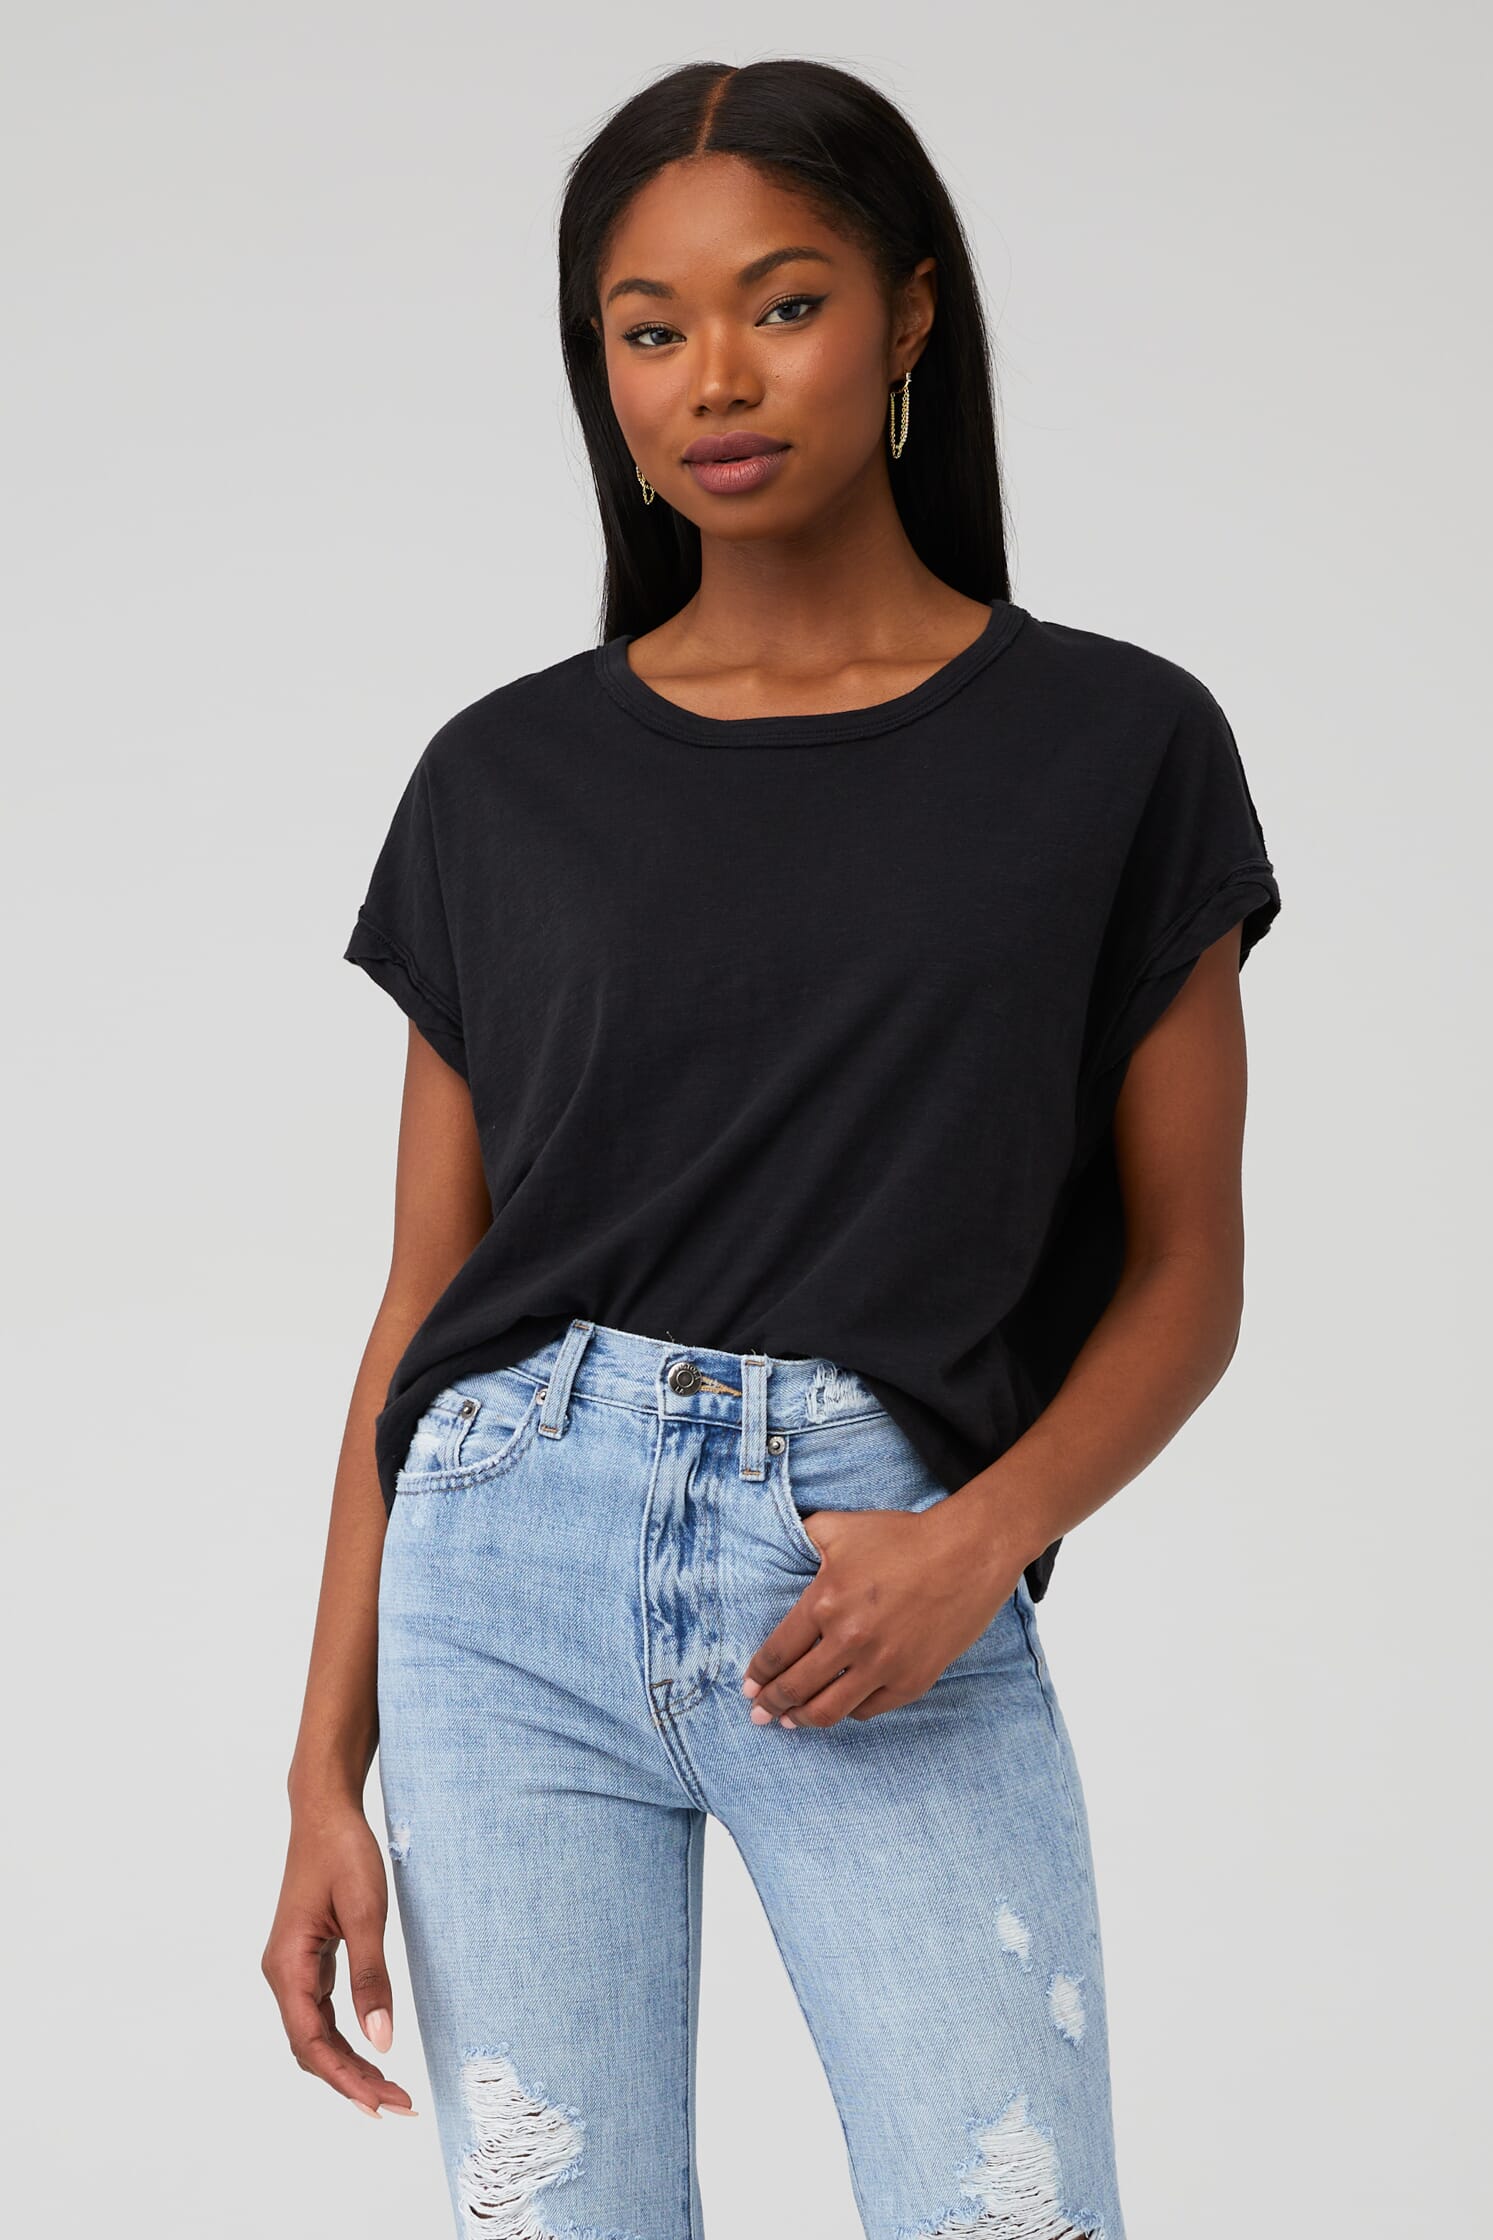 Free People | You Rock Tee in Vintage Black | FashionPass